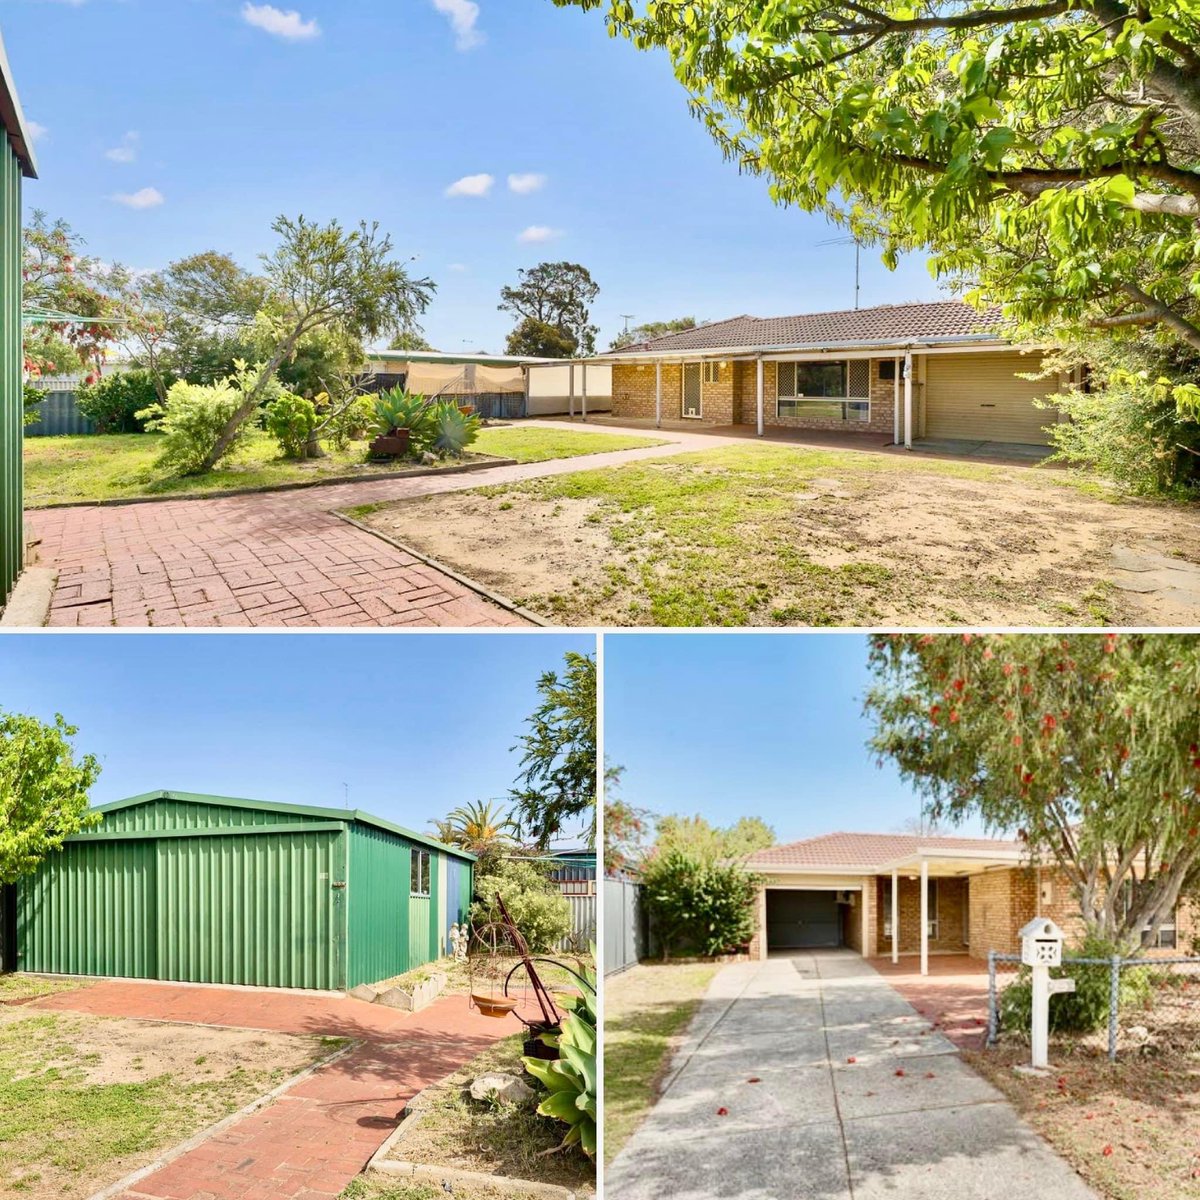 💰 6.8% YIELD WA PROPERTY UNDER $450K GROWS $60K (14%) IN FIVE MONTHS! 🏠 ✅ Low Maintenance Brick & Tile 💲 ✅ Zero Vacancy: Tenants Moved In Day After Settlement ✅ Big Workshop Shed: Tenant Bonus! ✅ No Confidence >> Fully Confident! ✅ Bought Interstate TWICE WITHOUT A…